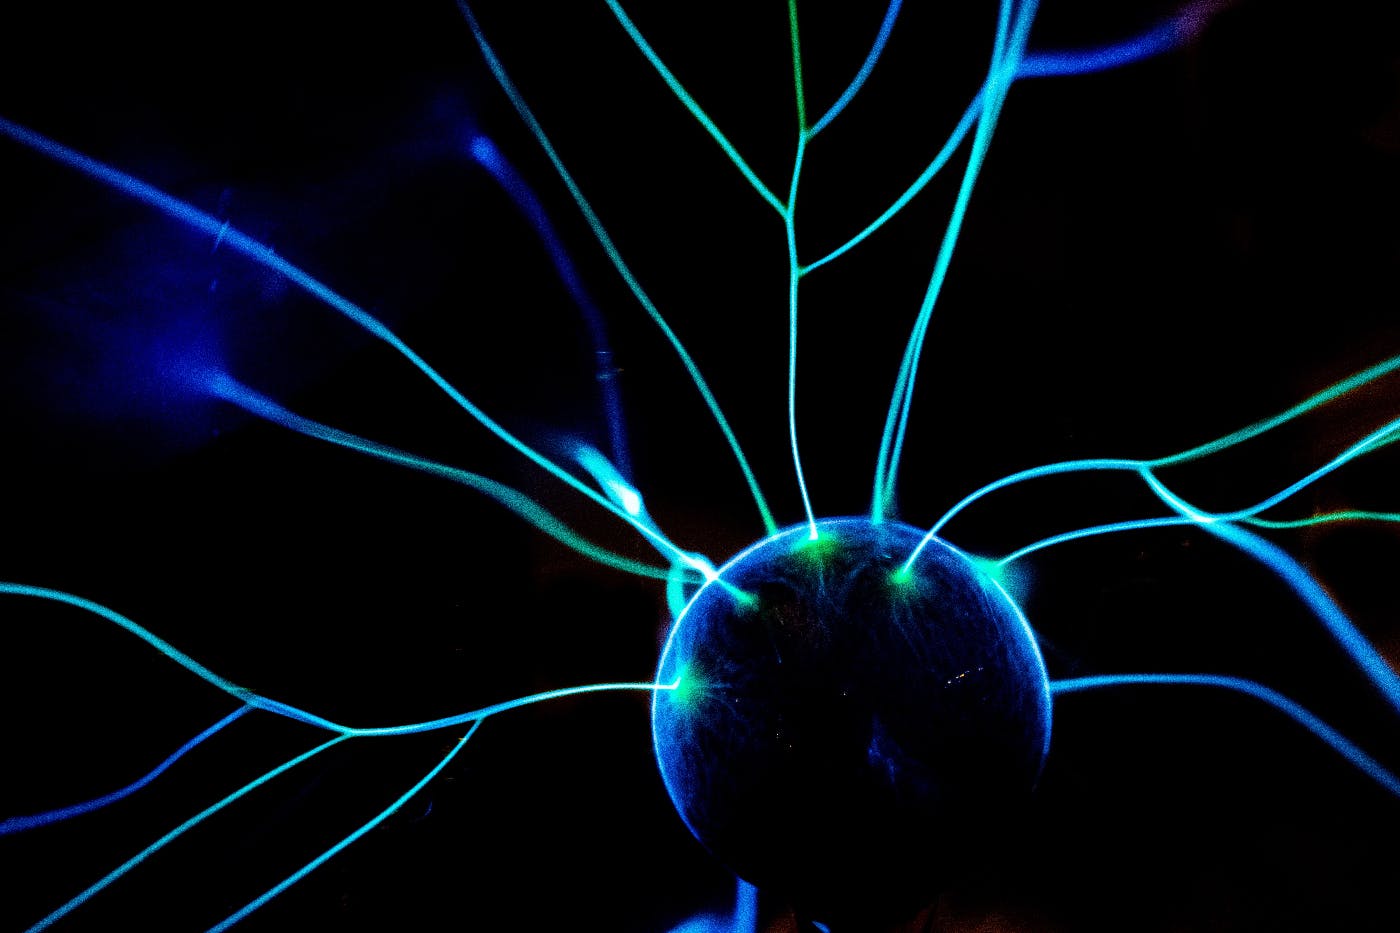 A plasma ball shooting green strands of electricity